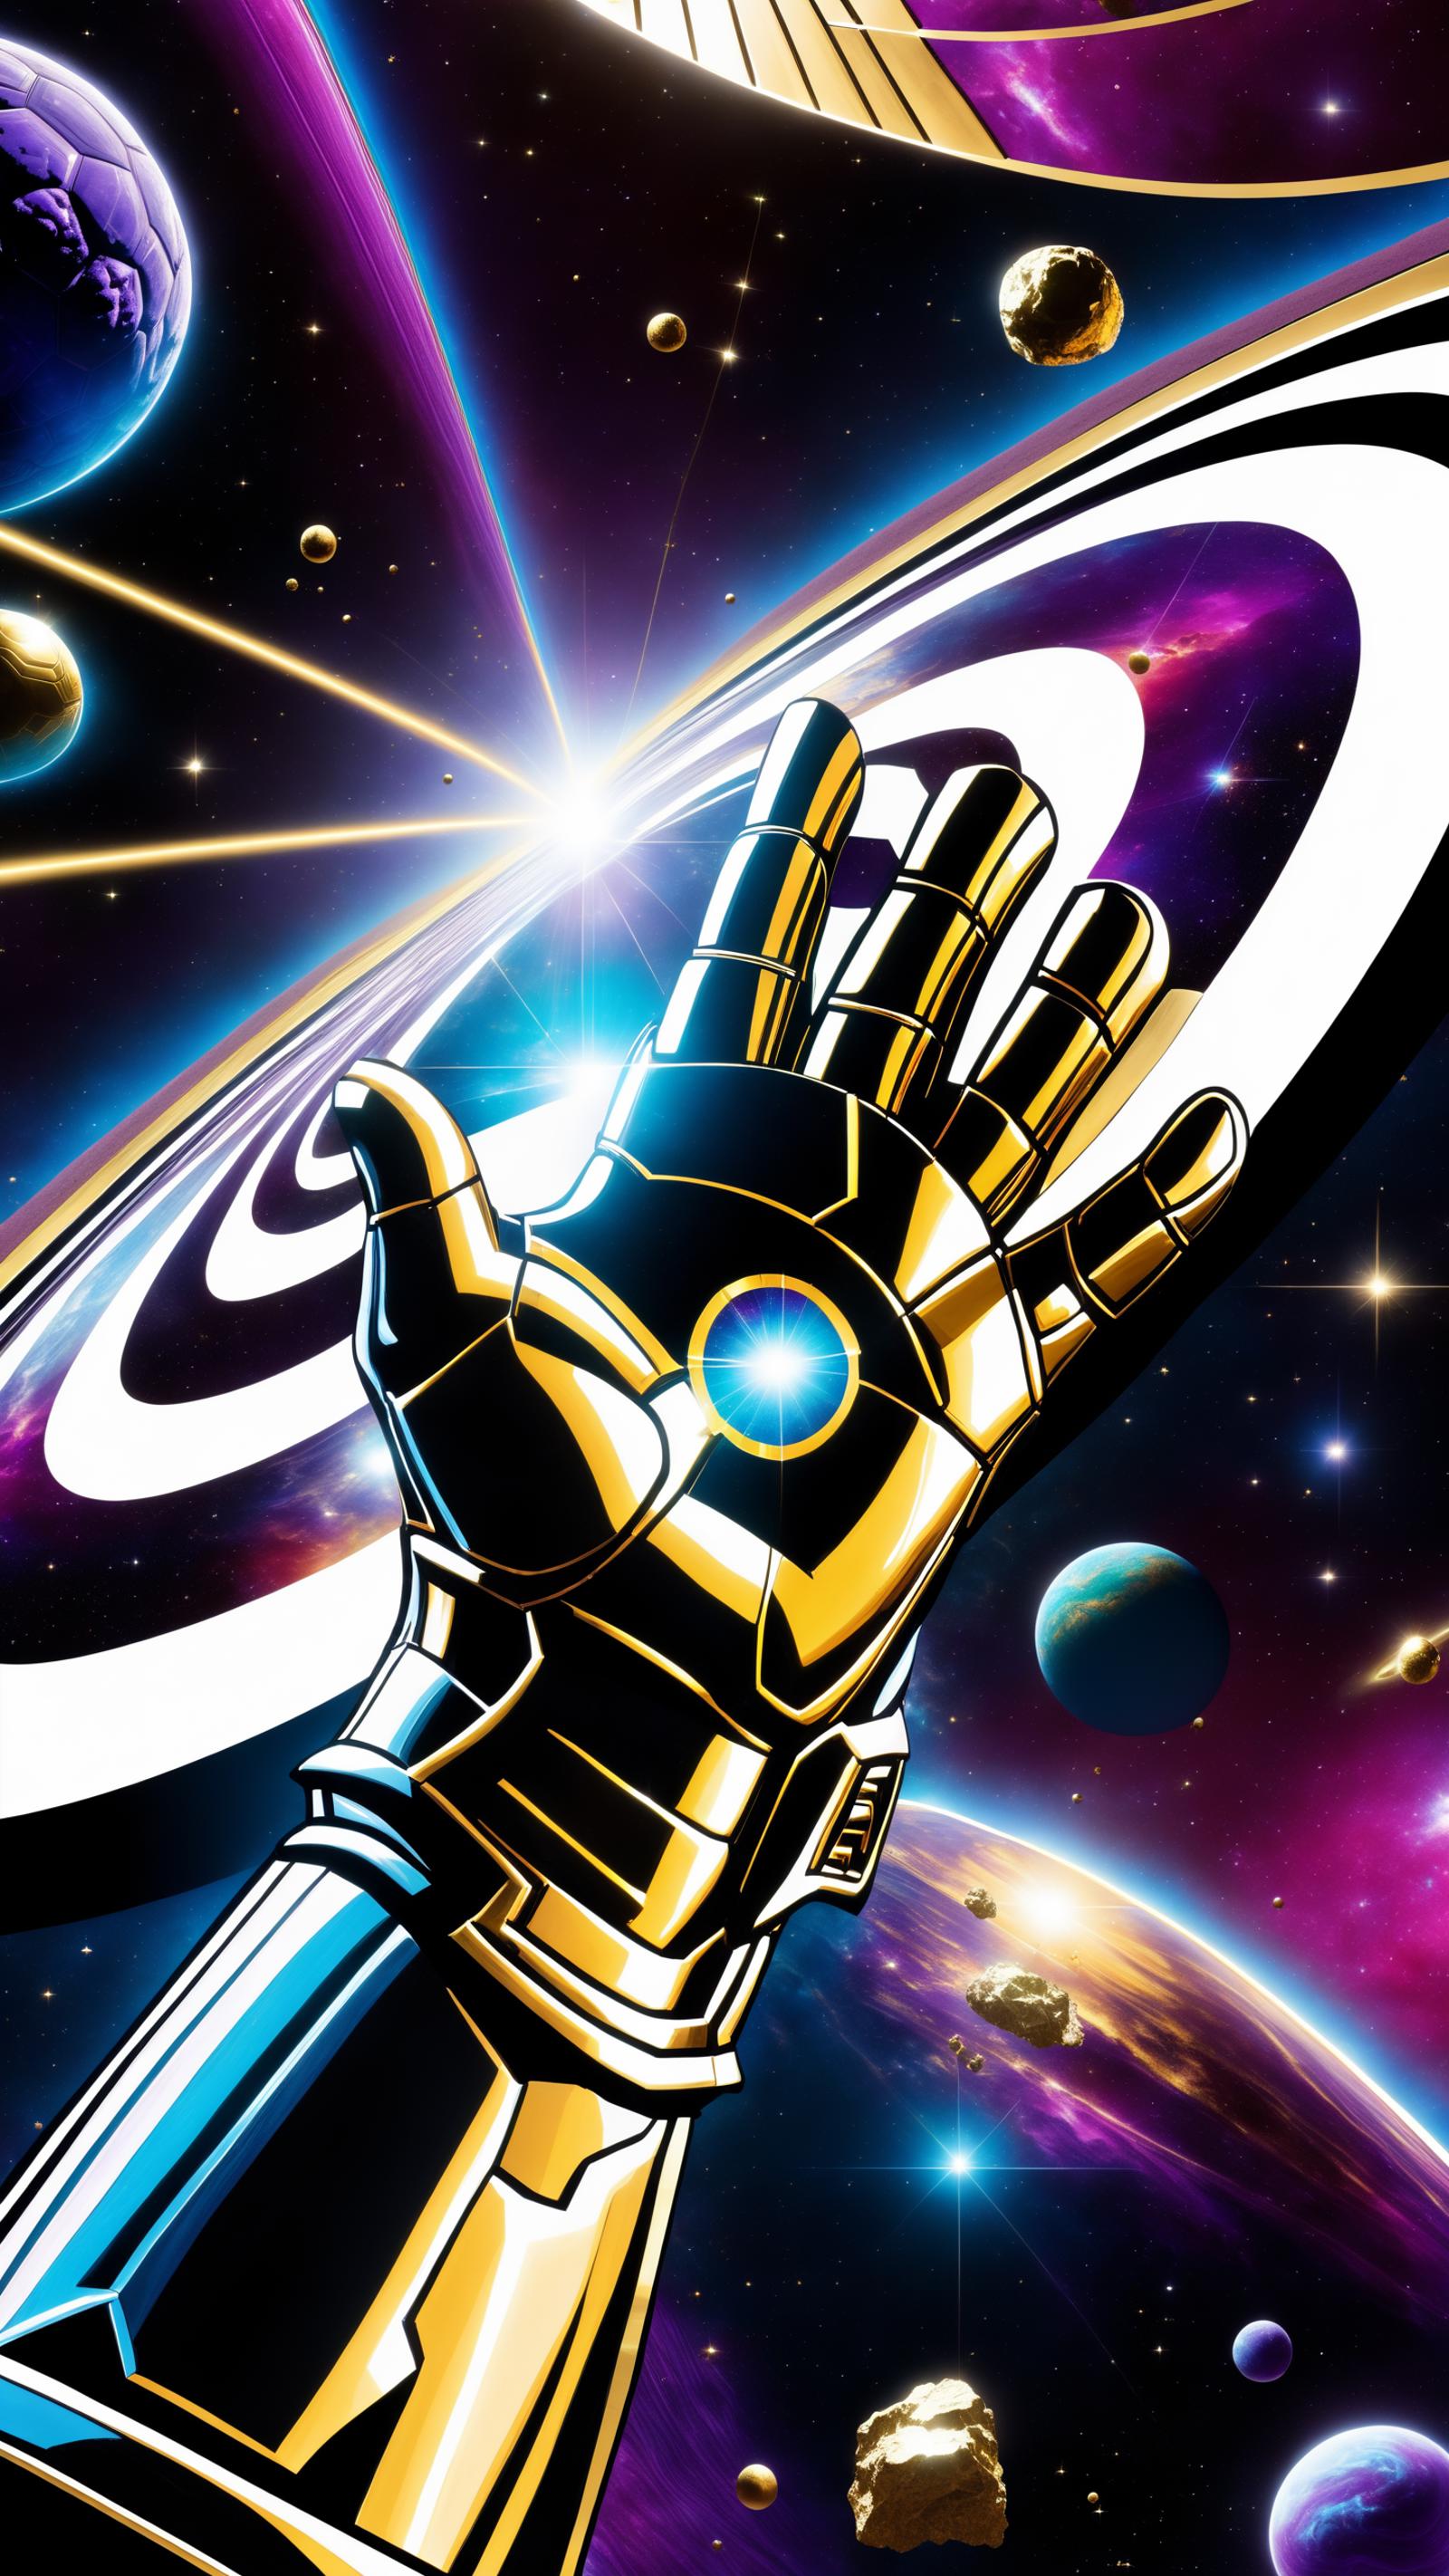 A Superhero's Robotic Hand Reaching Out to the Cosmos: Planets and Stars in the Background